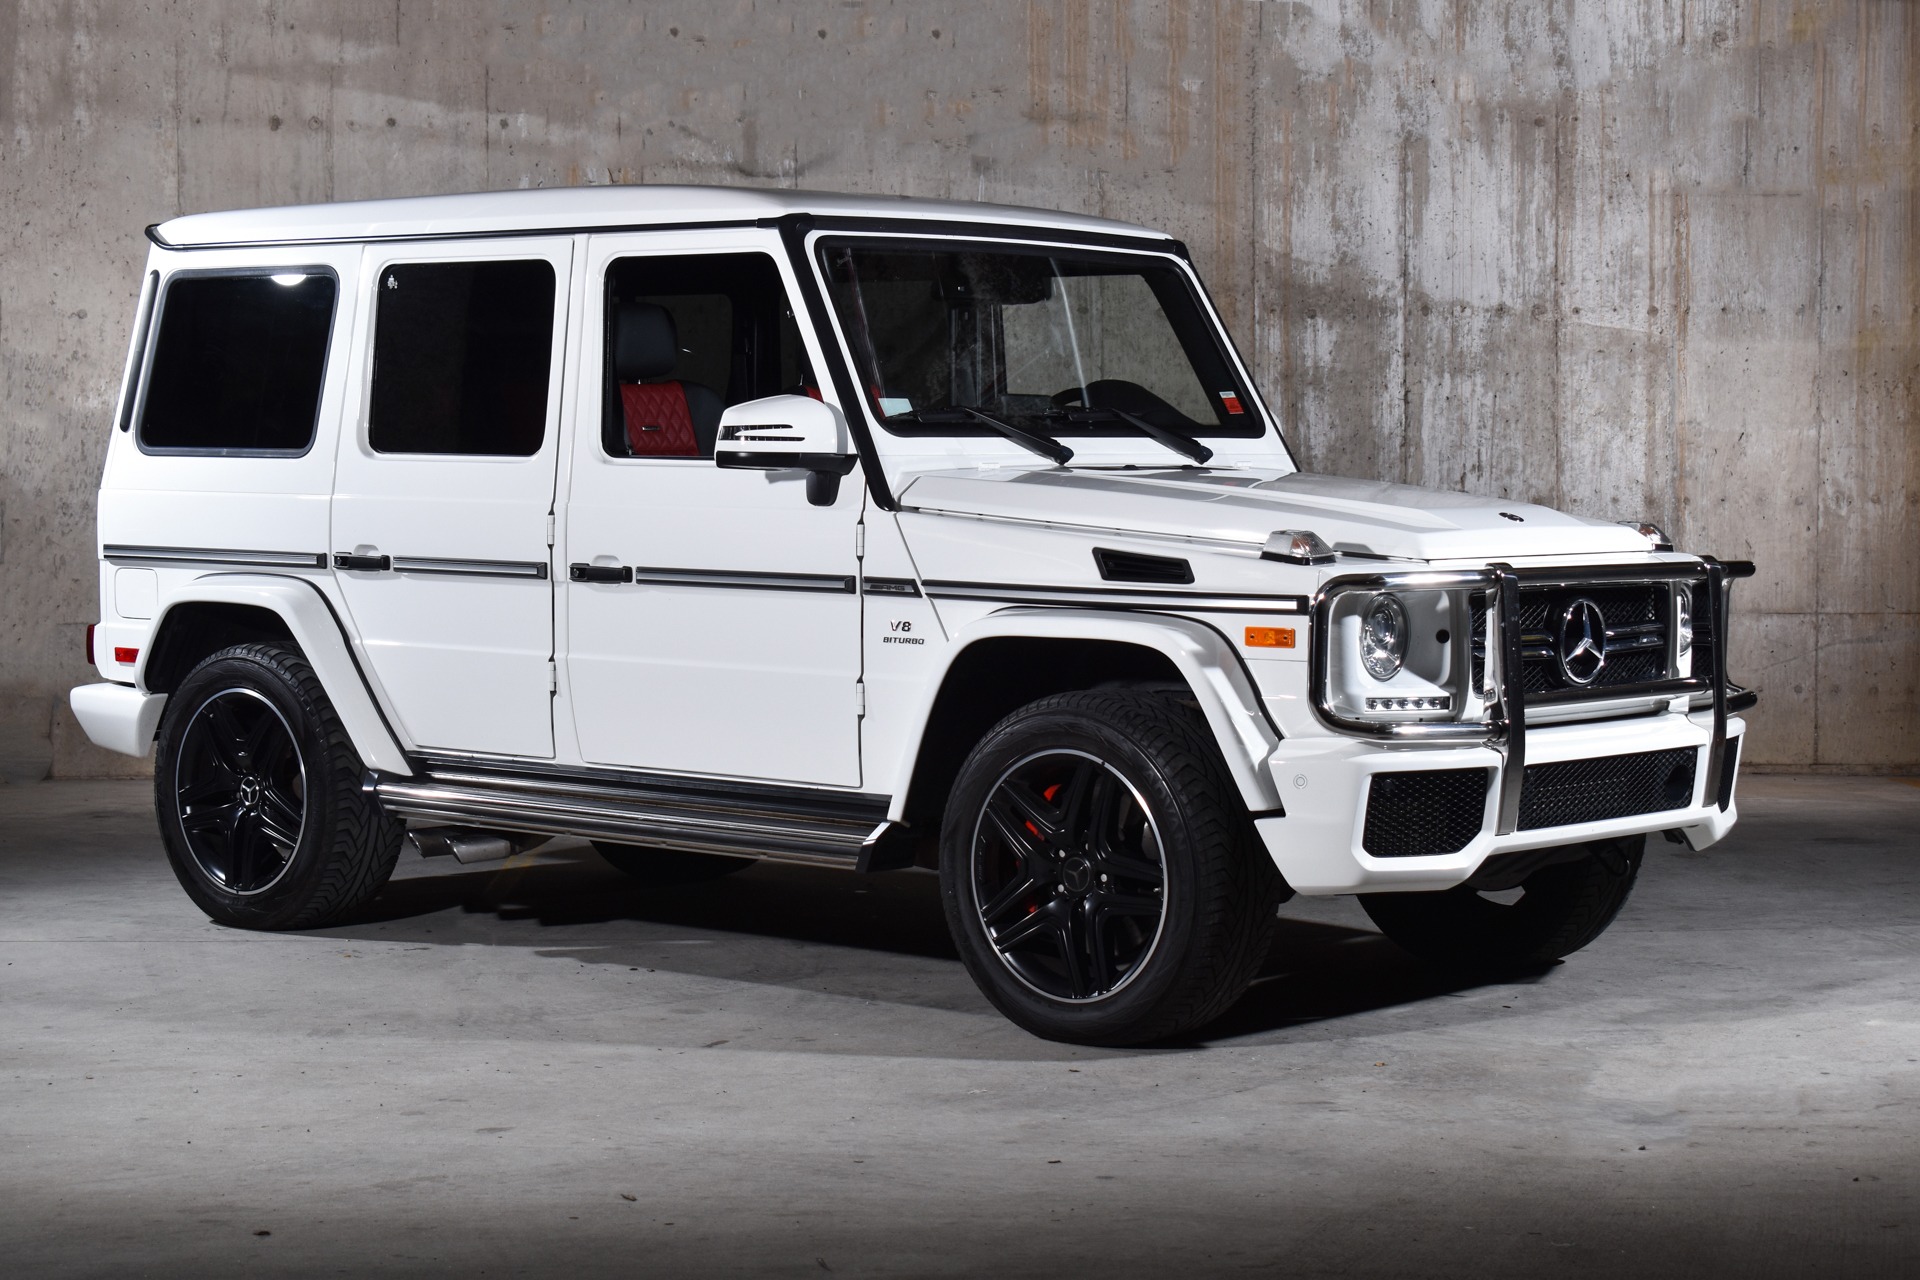 Used 17 Mercedes Benz G Class Amg G 63 For Sale Sold Ryan Friedman Motor Cars Llc Stock 312c